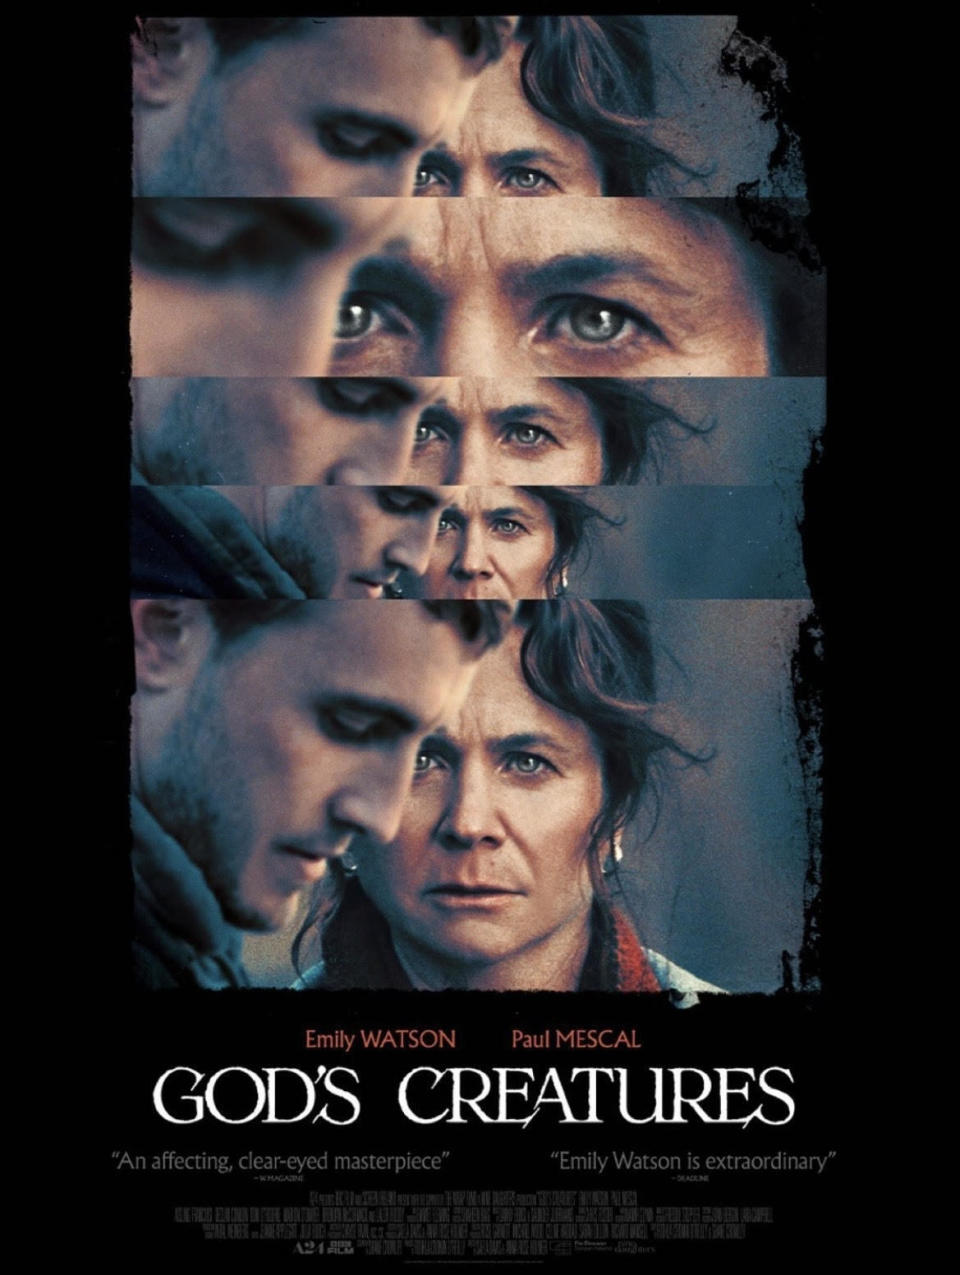 The poster for God's creatures